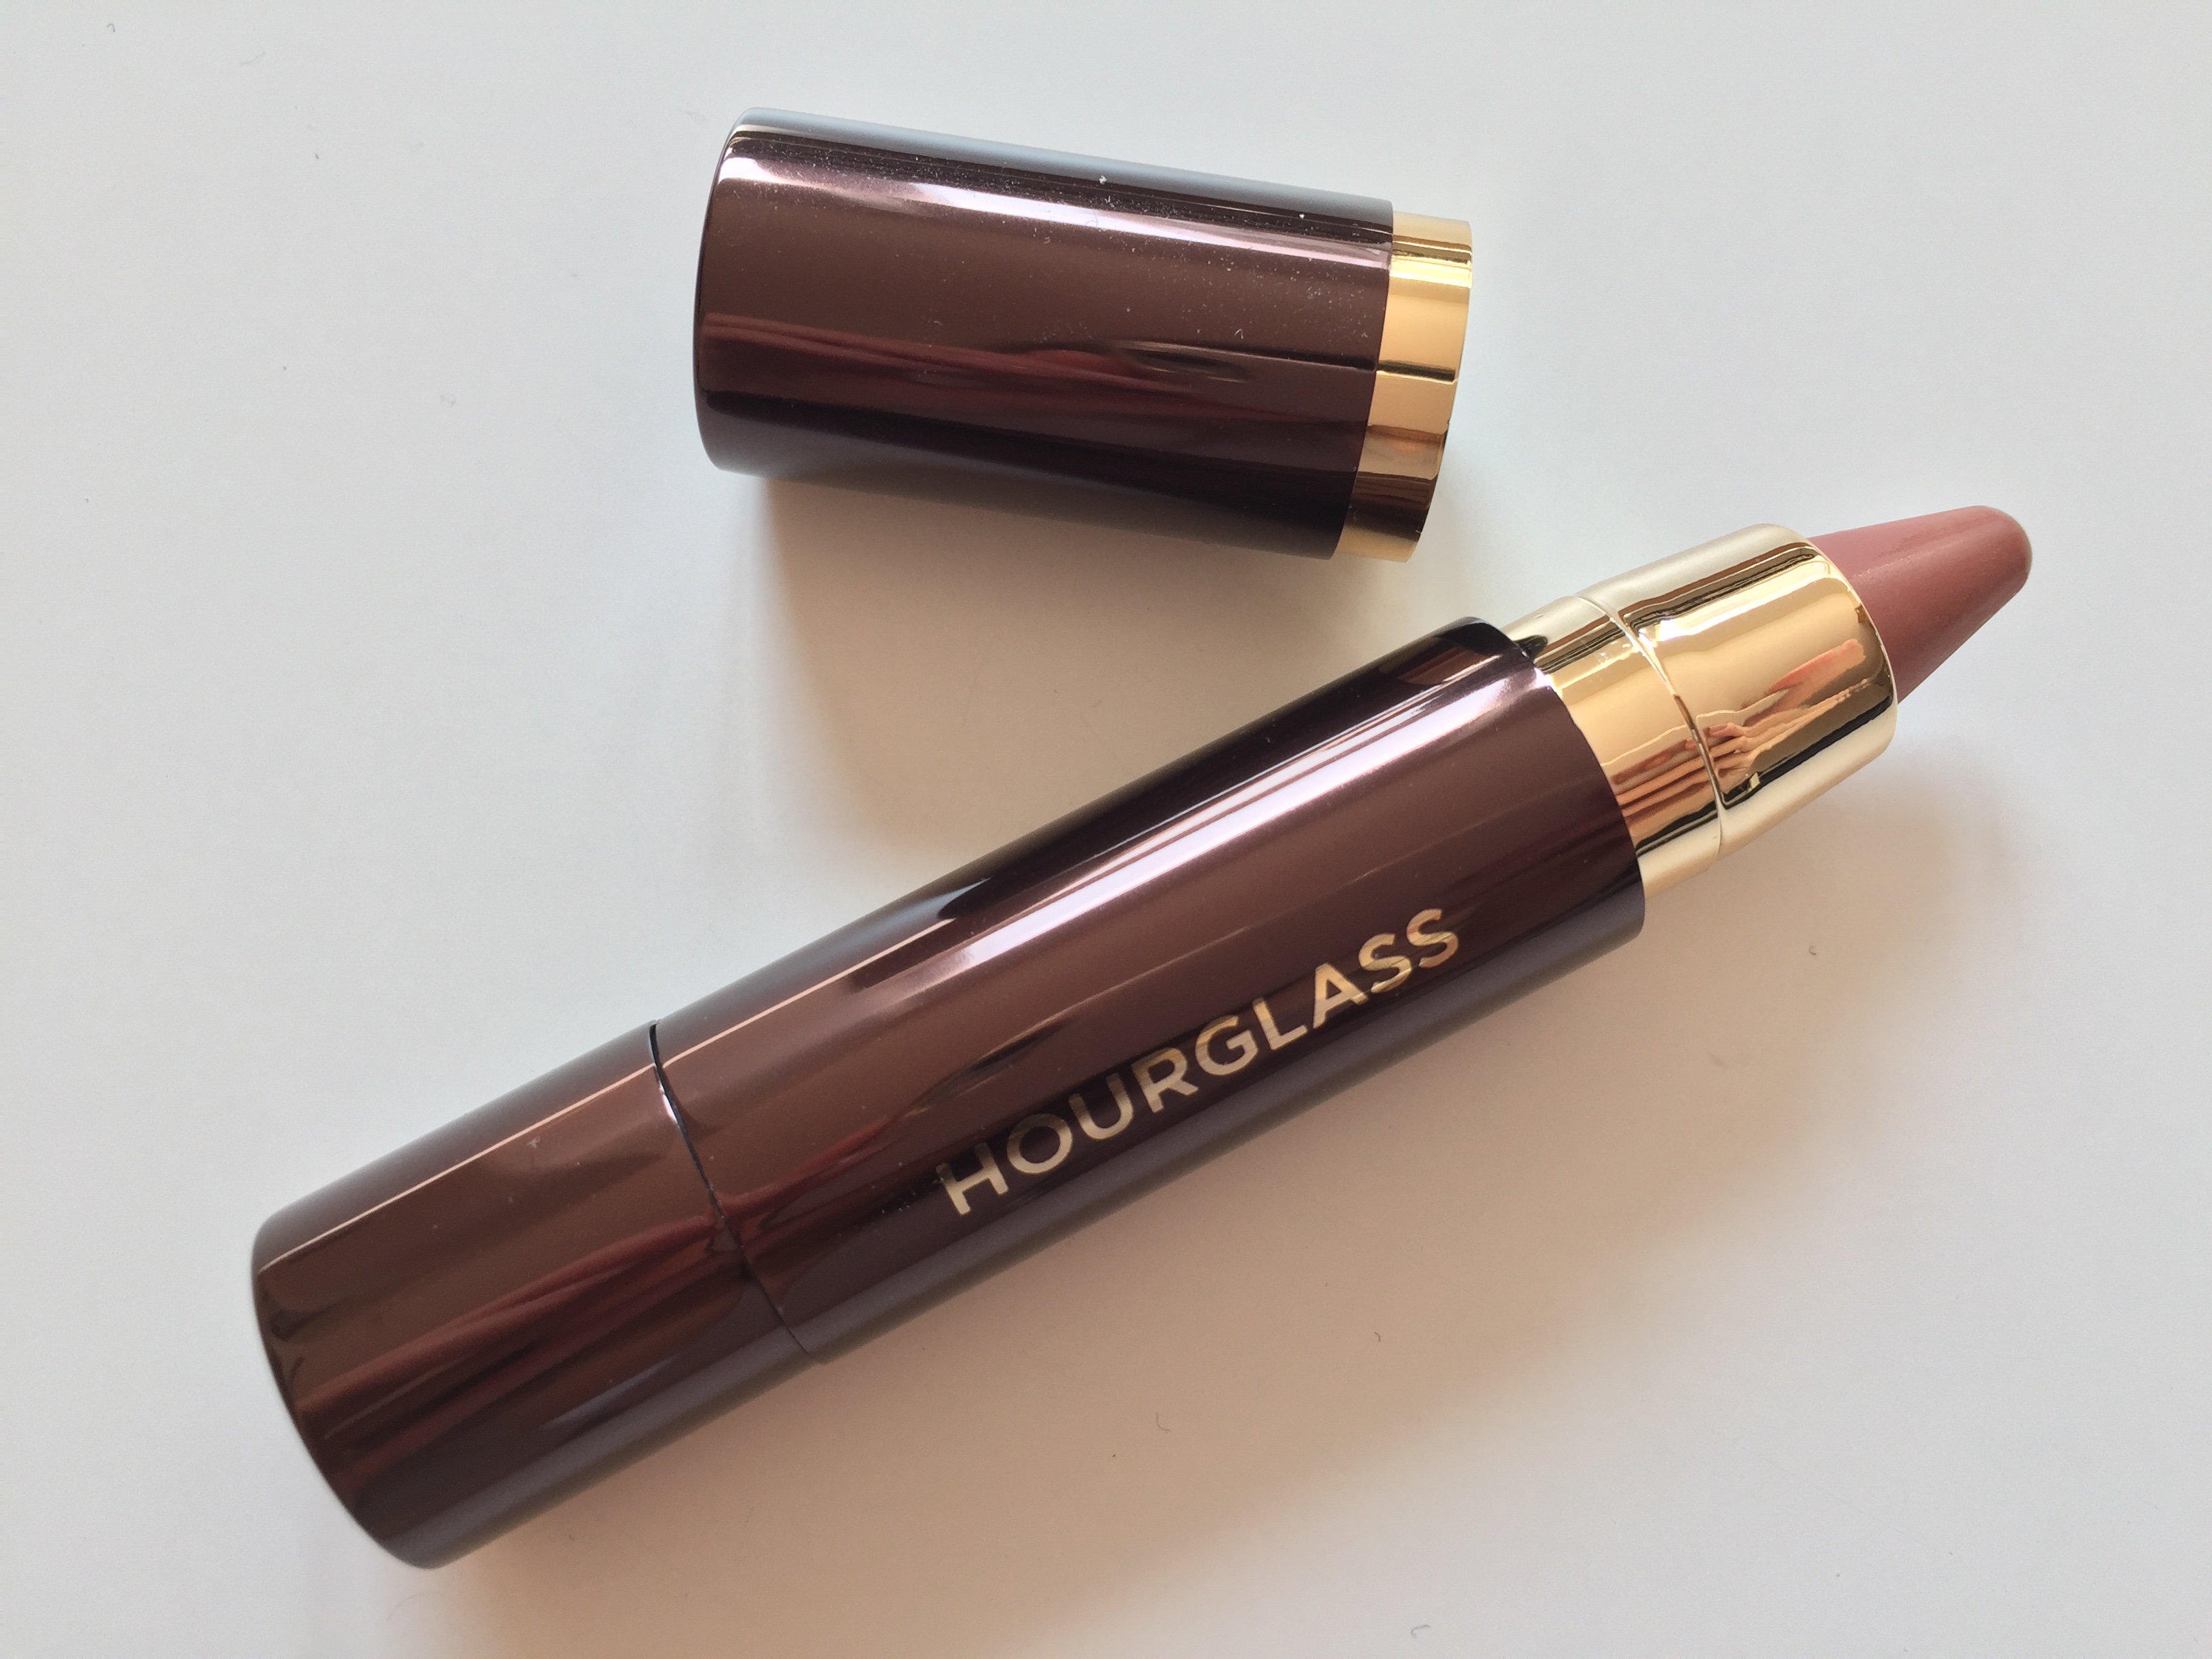 Hourglass GIRL Lip Stylo review by facemadeup.com